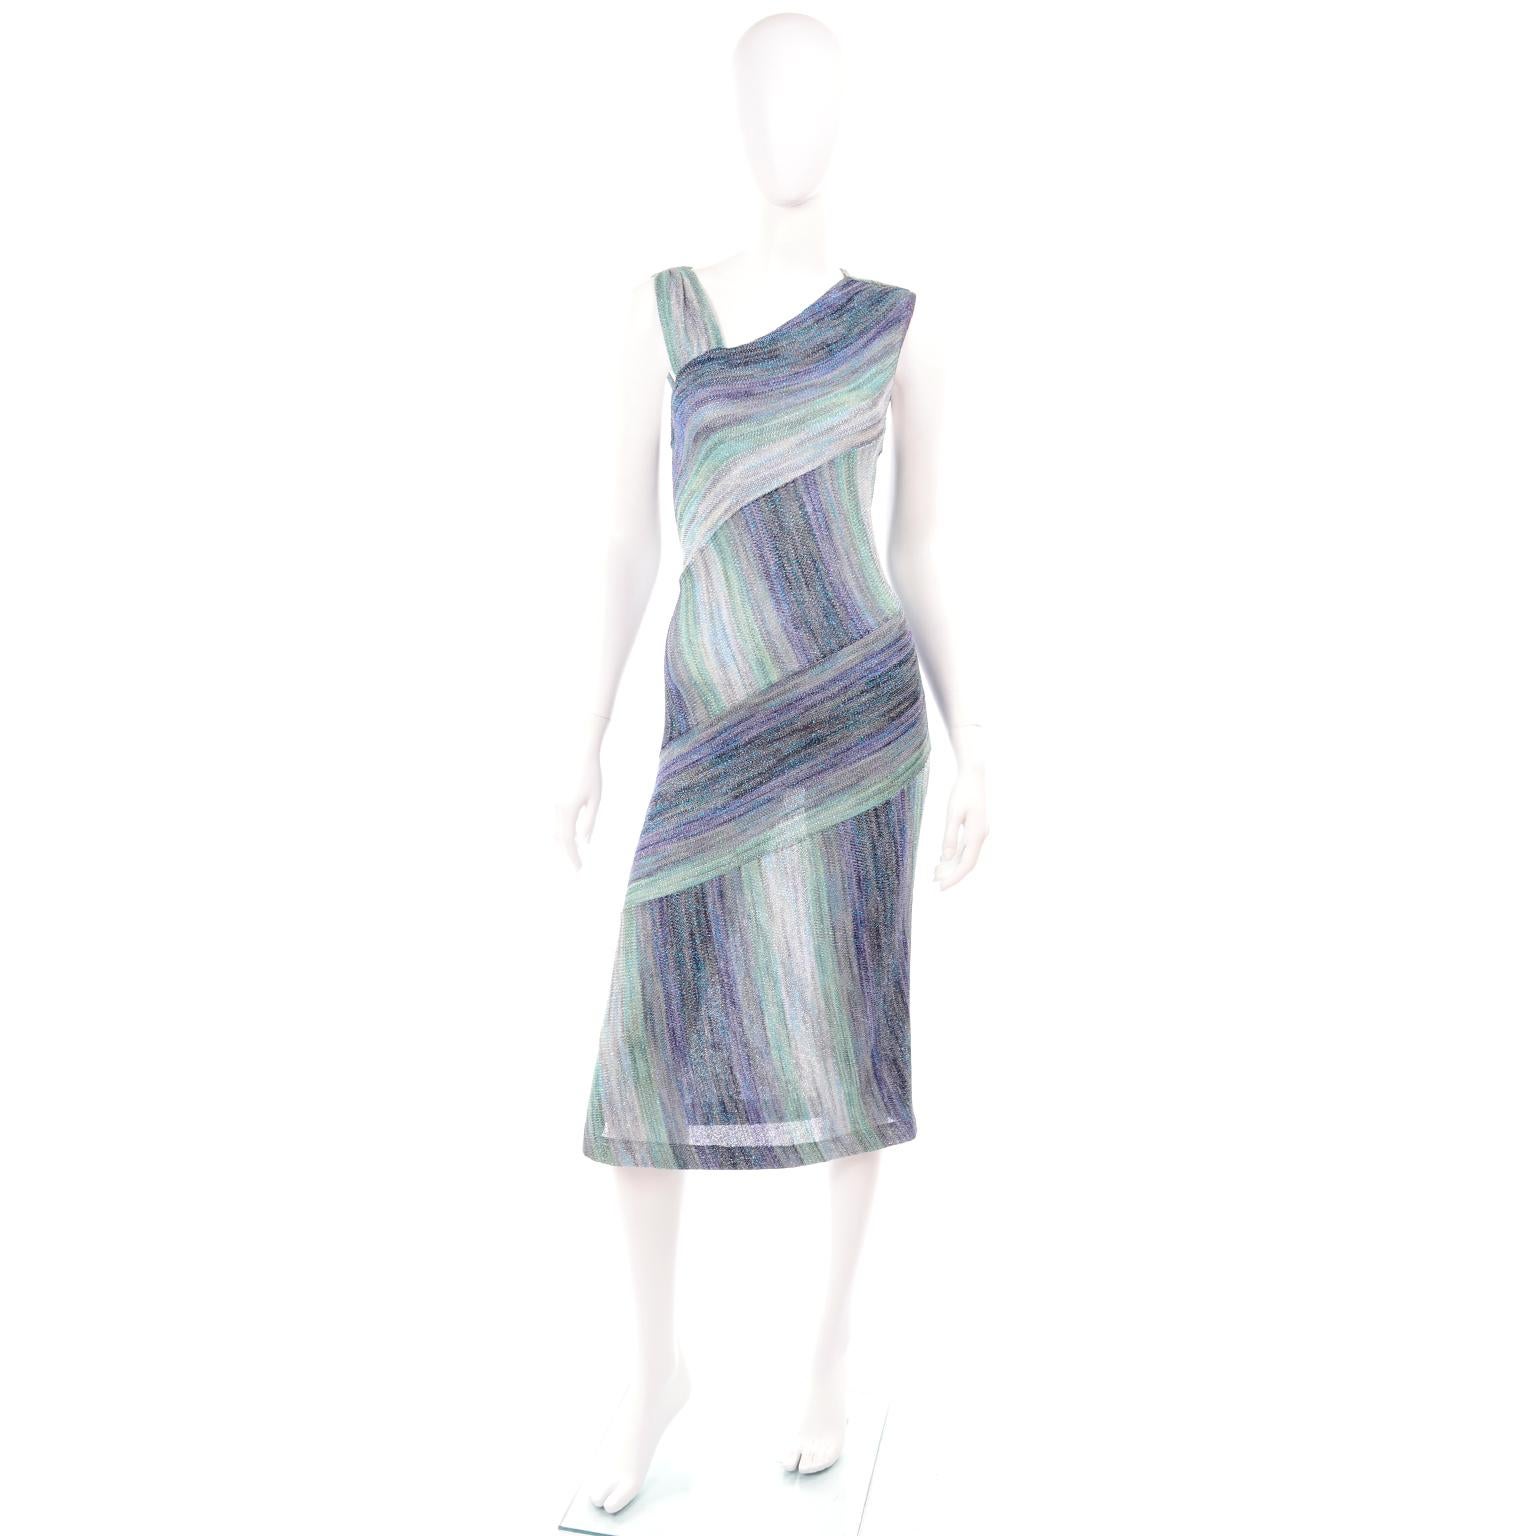 This is a very pretty Missoni metallic purple, green and blue knit dress with alternating vertical and horizontal abstract striped pattern. This dress slips overhead and has asymmetrical shoulder styling.  
Labeled an Italian size 44 and we estimate